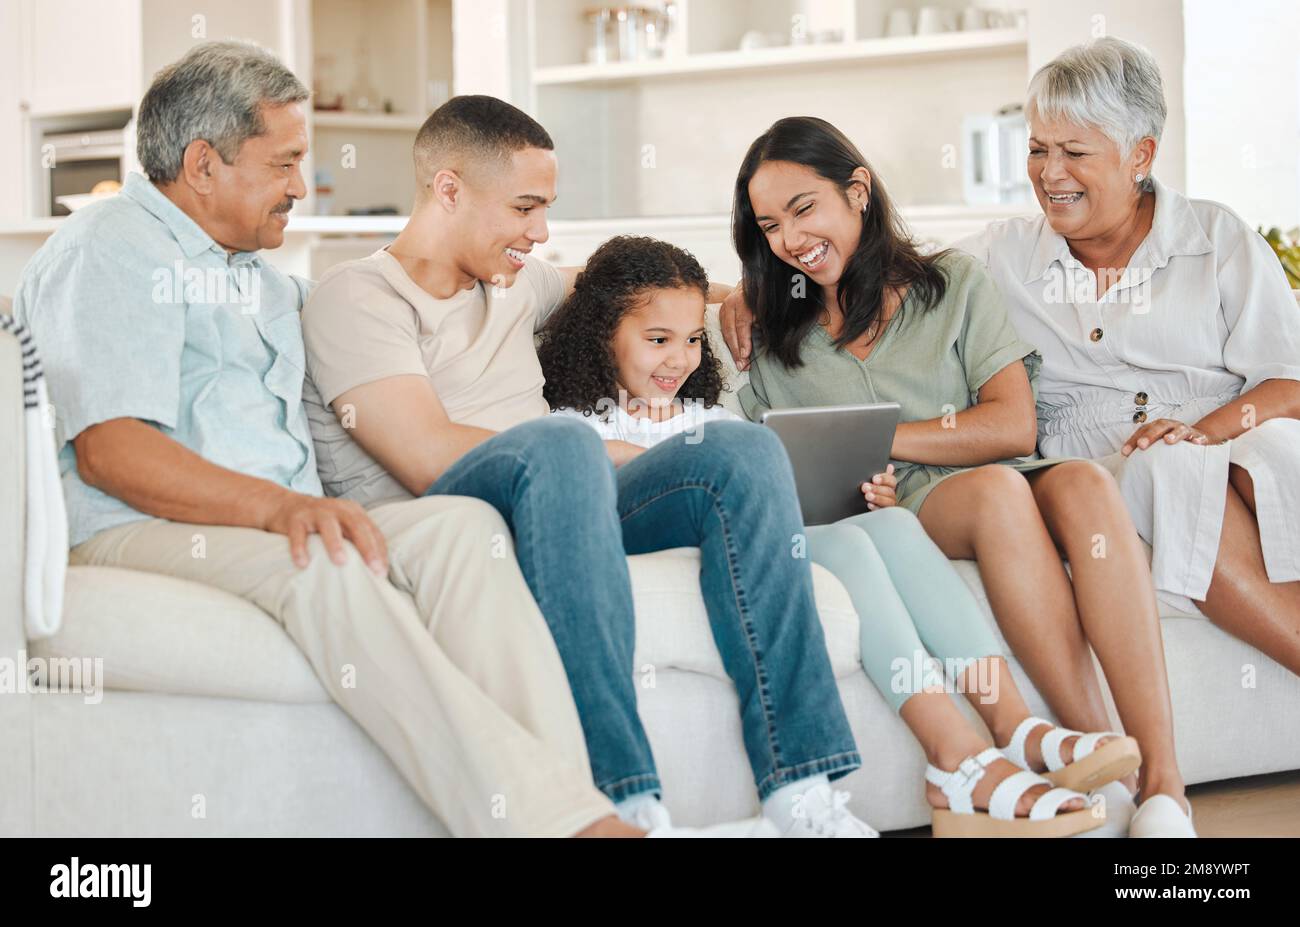 Days well planned. a beautiful family bonding on a sofa at home. Stock Photo